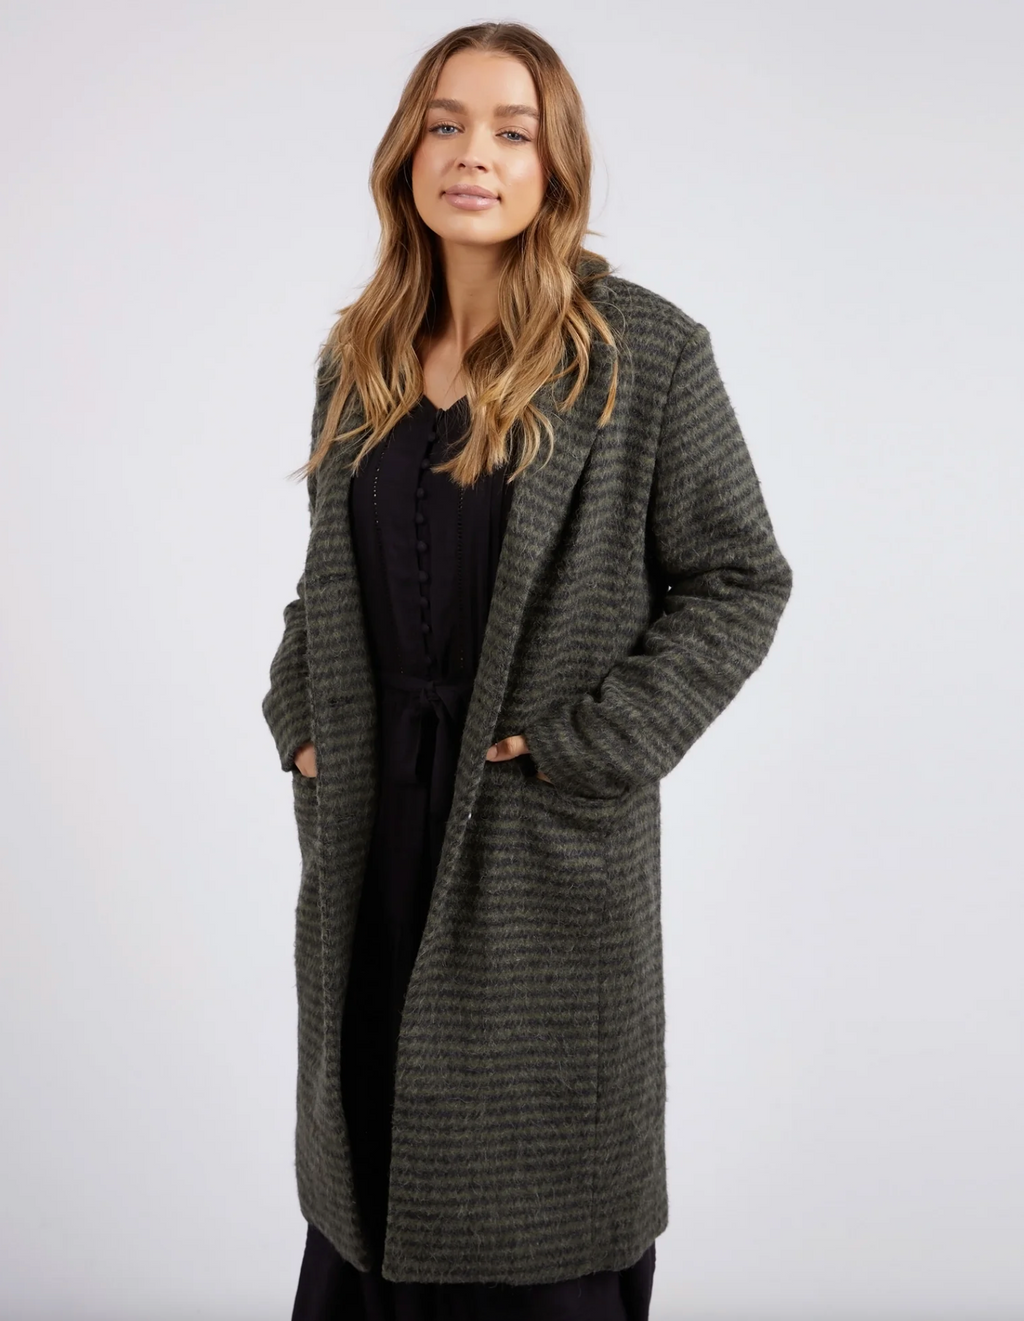 clementine coat by foxwood is an oversized long winter jacket in a wool blend